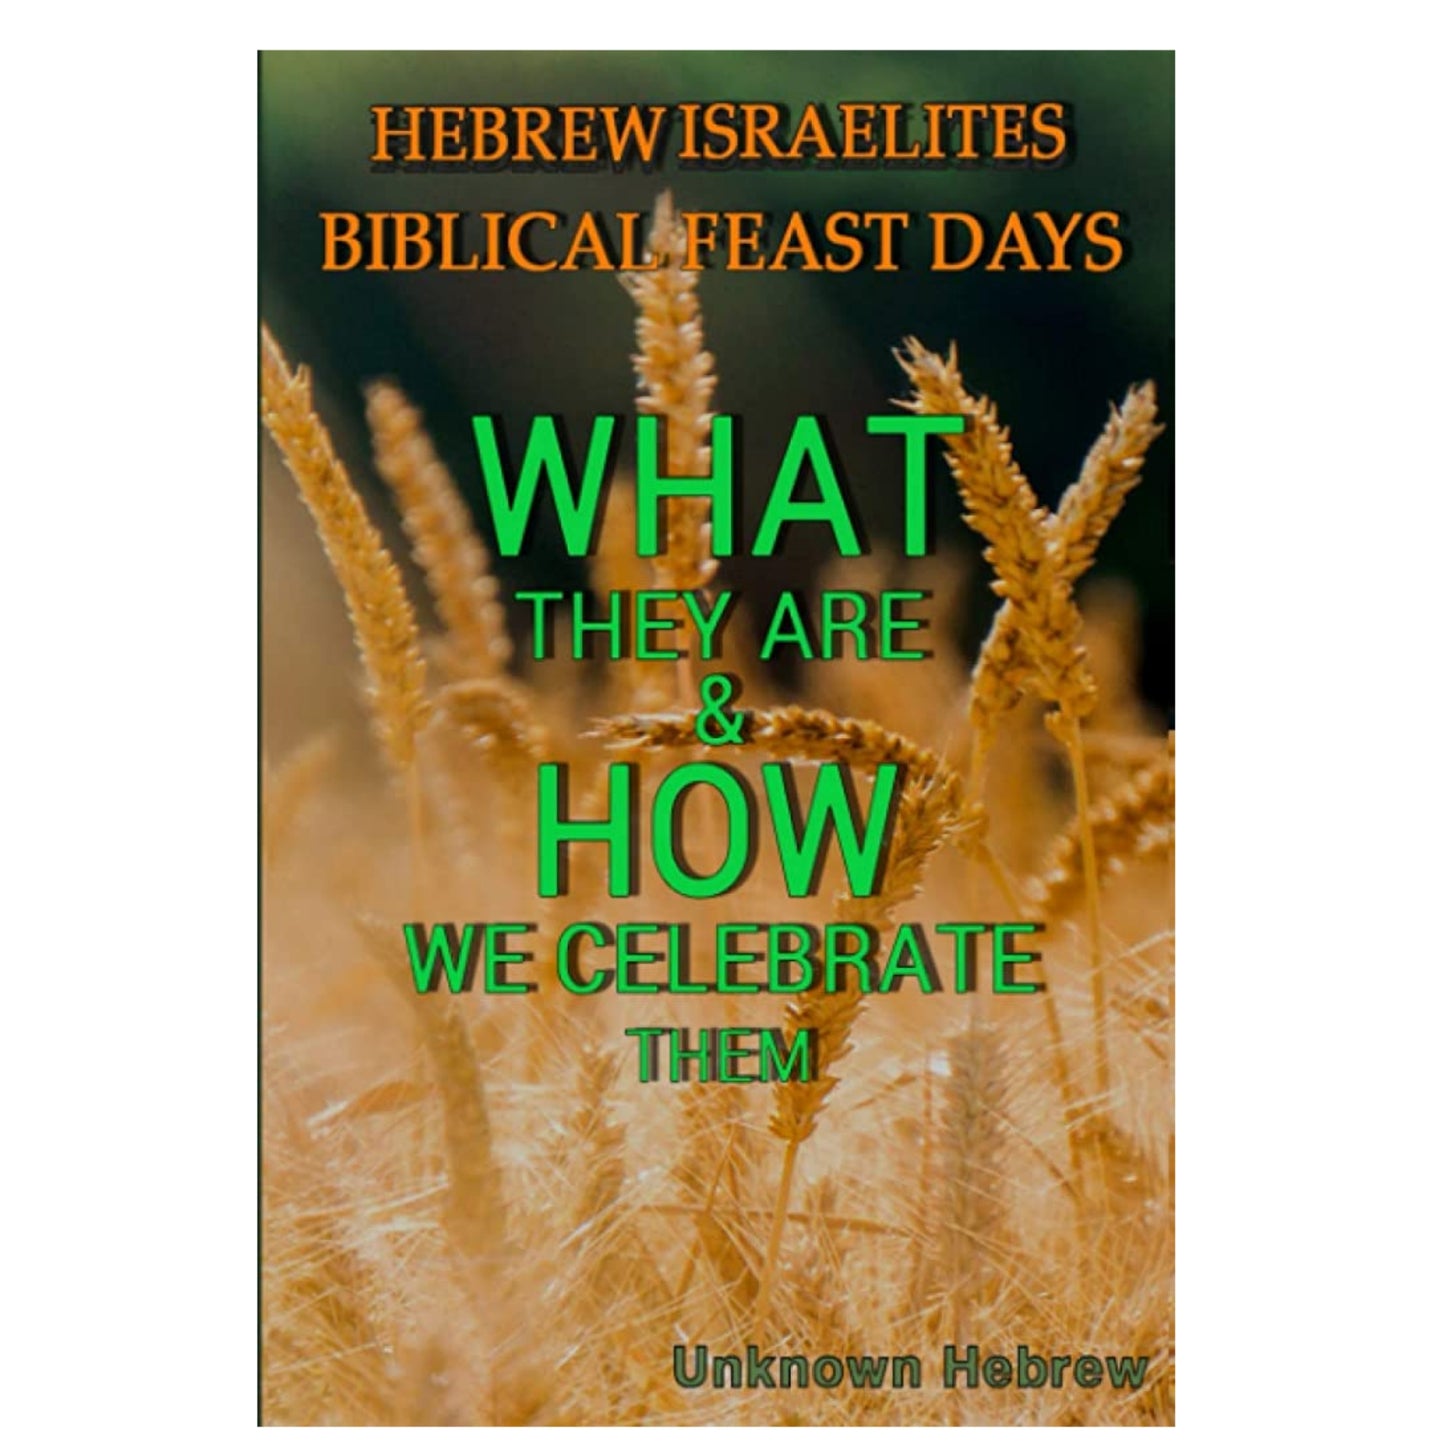 HEBREW ISRAELITES BIBLICAL FEAST DAYS: WHAT THEY ARE AND HOW WE CELEBRATE THEM